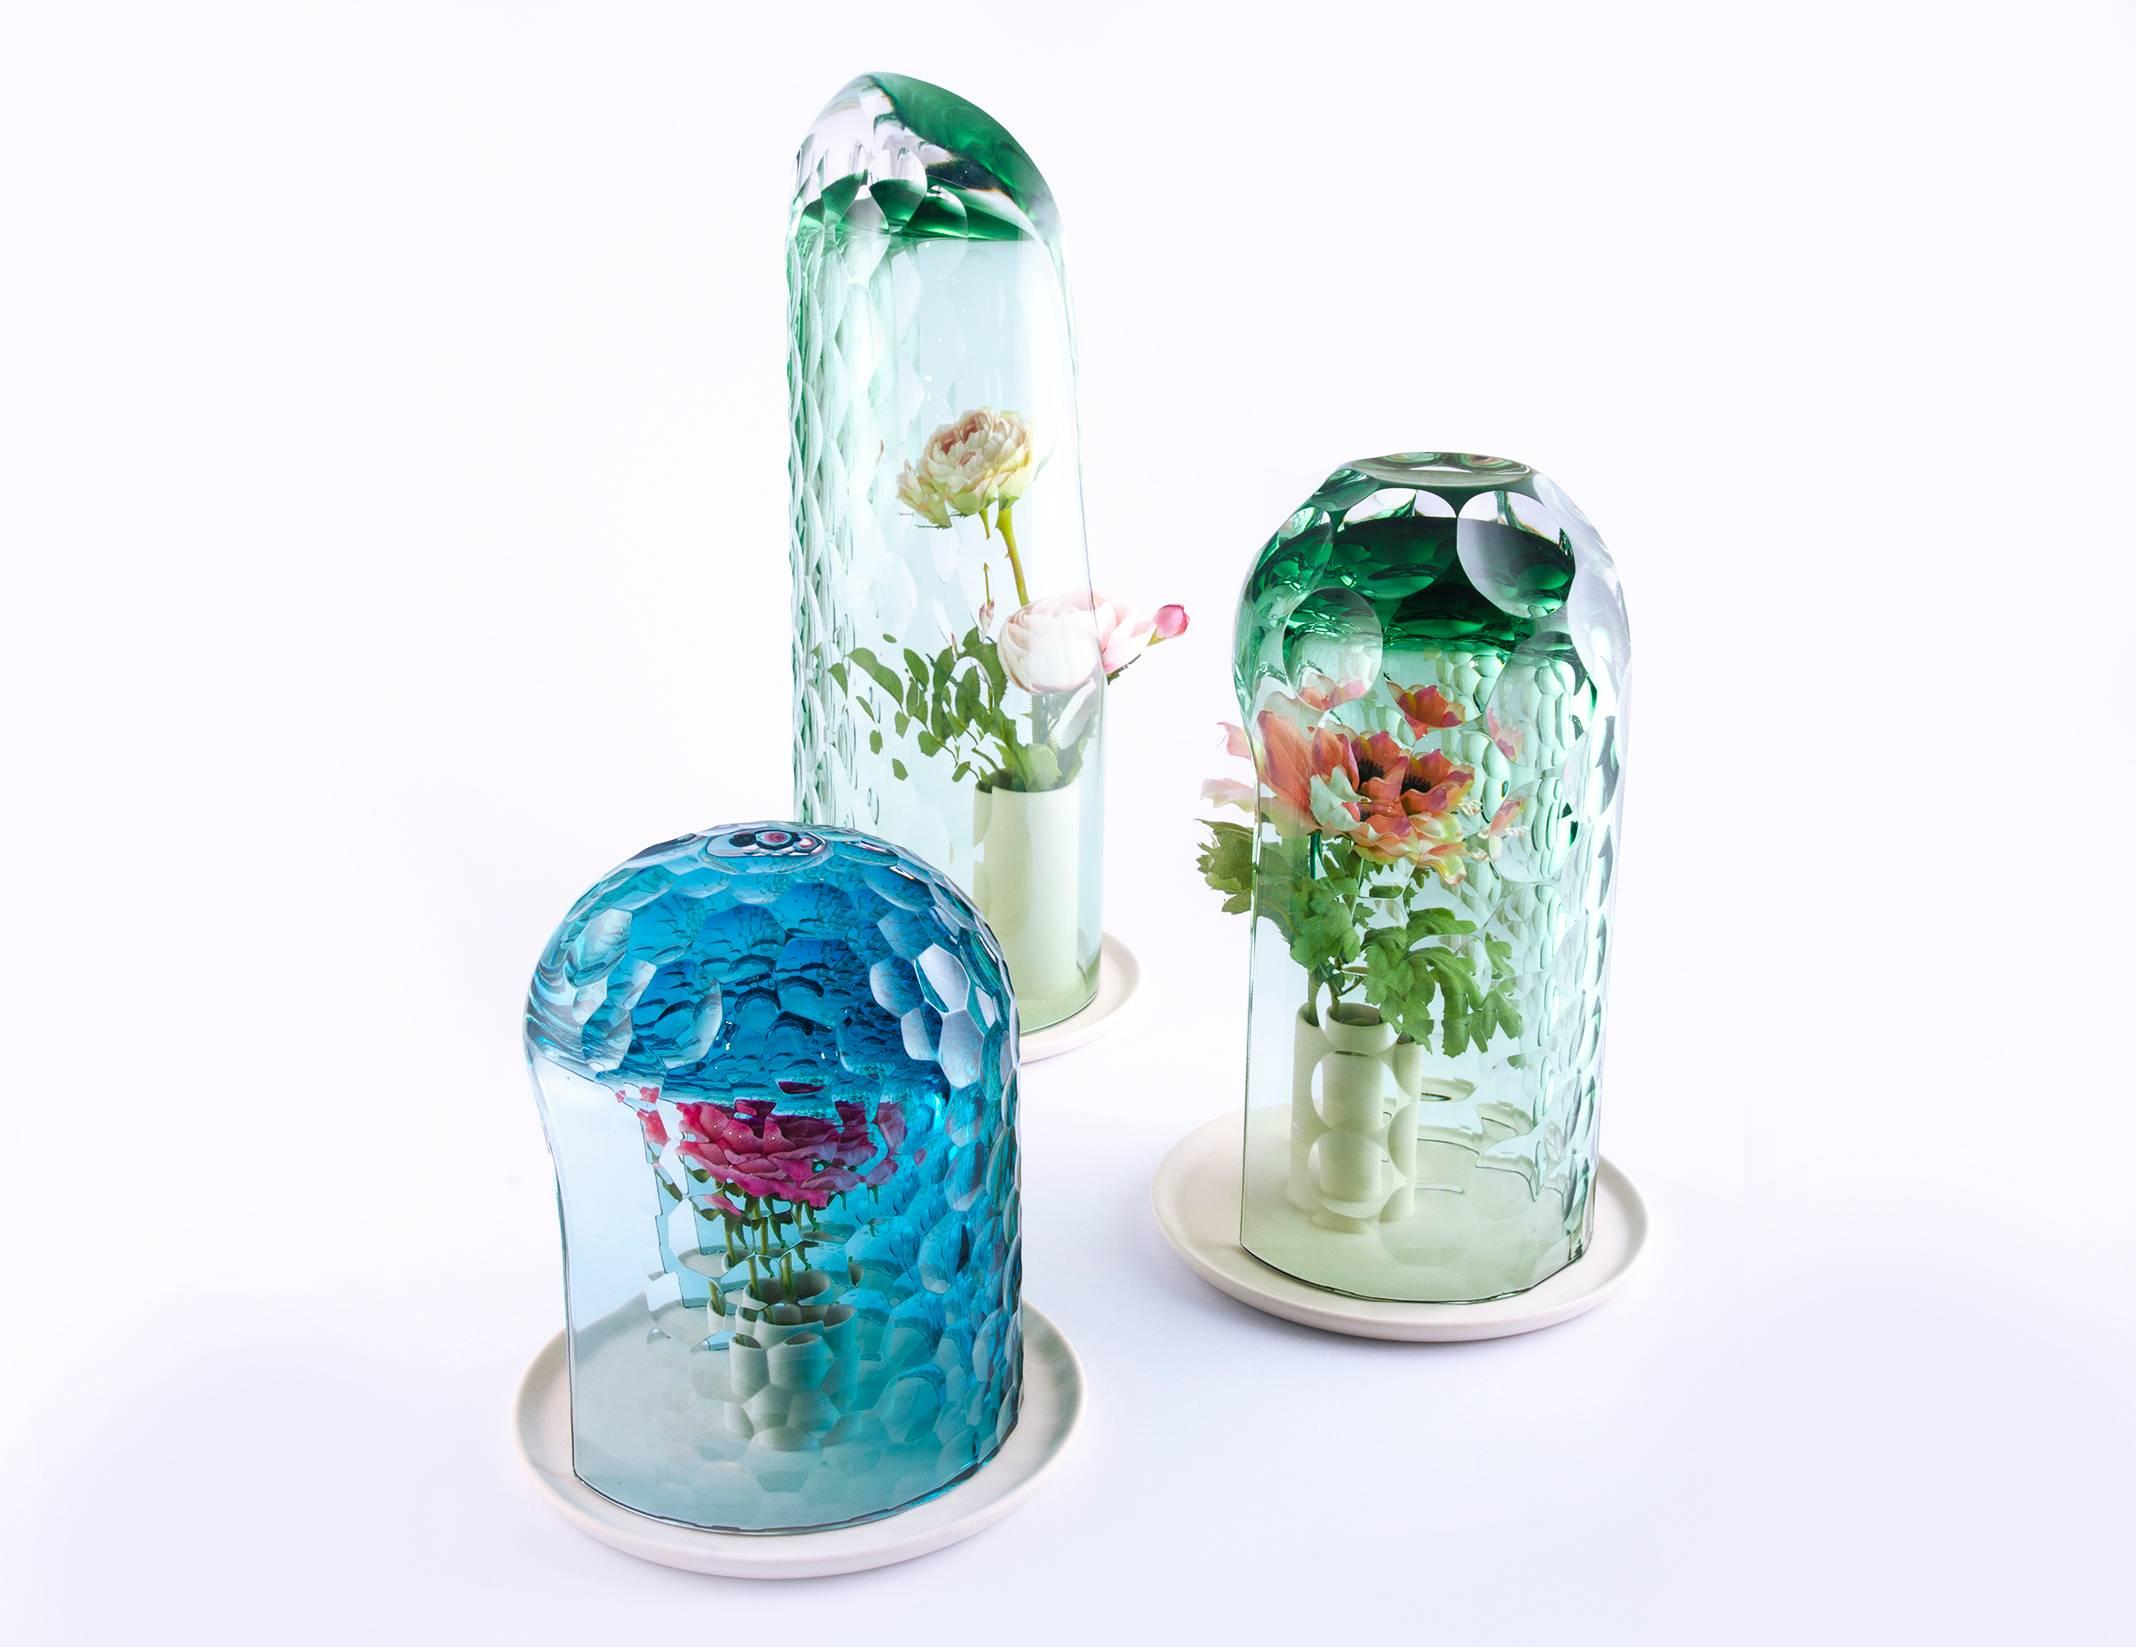 A signature quality of each handcrafted glass vase is the illusion created by its complex pattern of cuts. A kaleidoscopic effect is created within each glass form, so that when viewed from different angles, a single owner placed within it, OP-vase